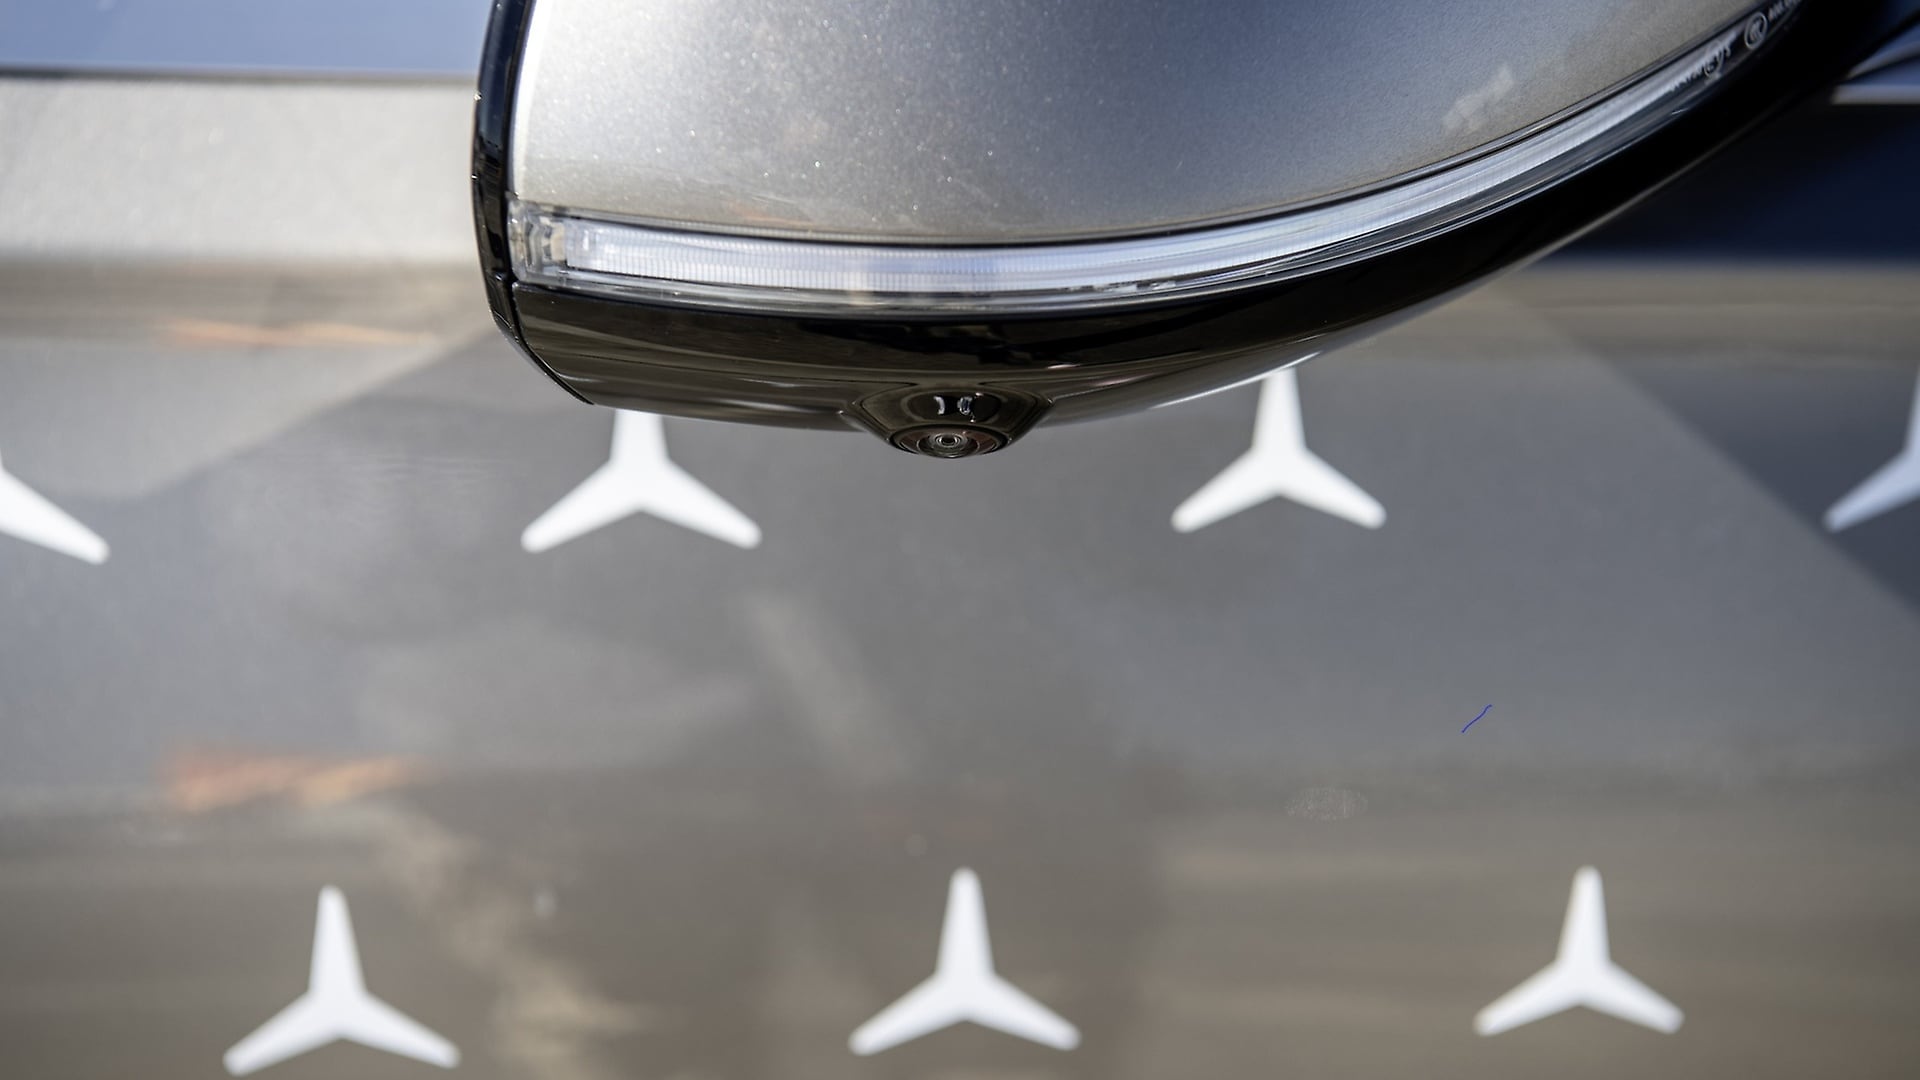 Cameras in the exterior mirrors of the DRIVE PILOT detect the lane markings.